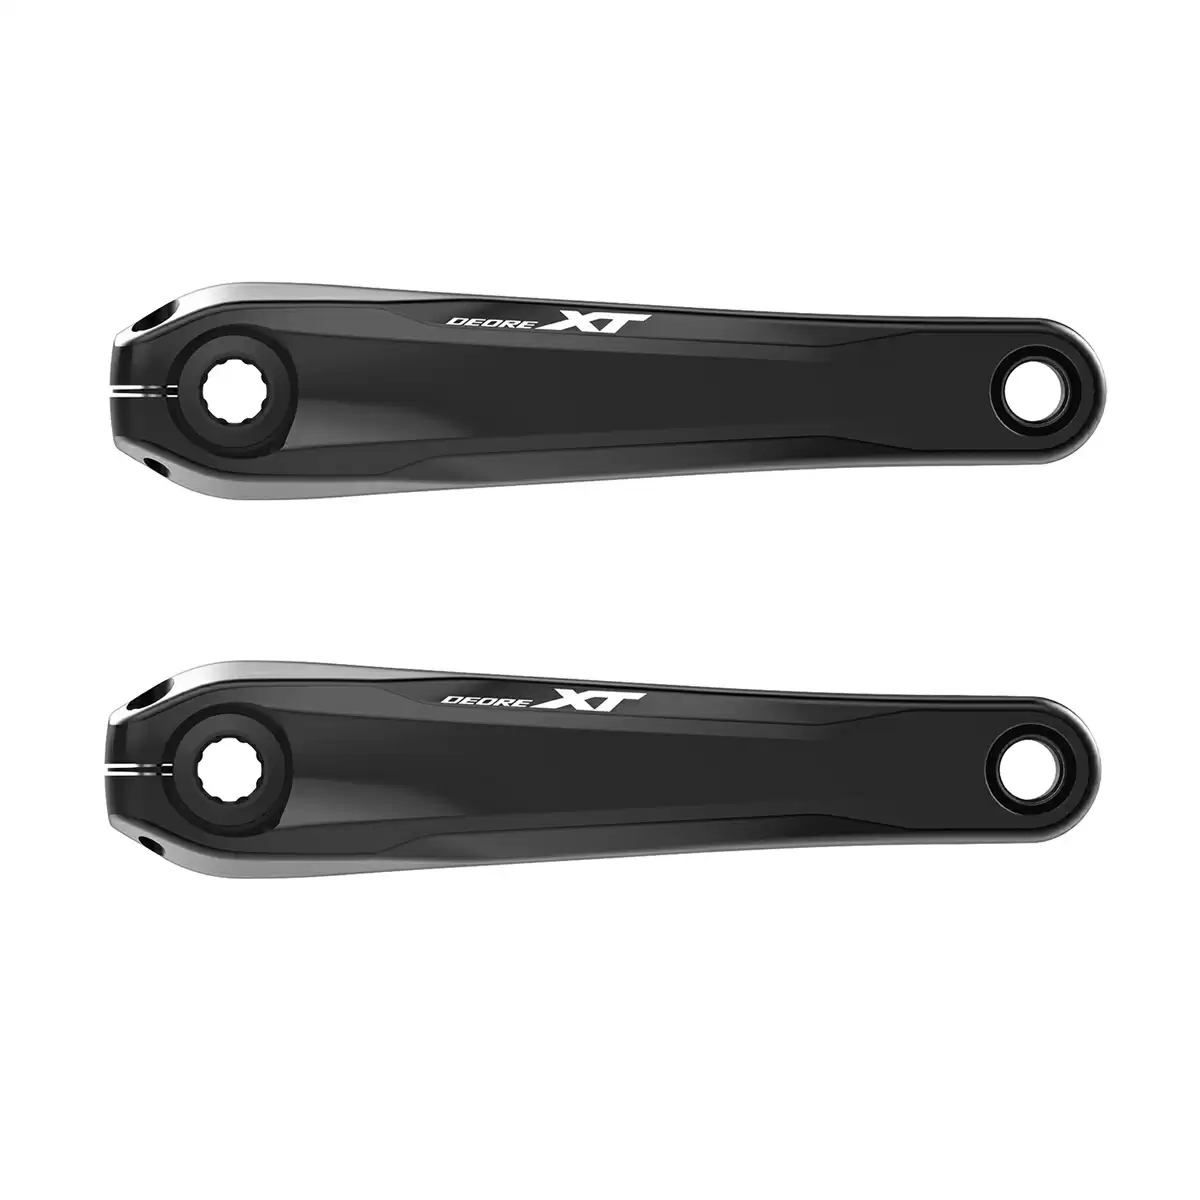 Cranks arms for EP8 engine Hollowtech FC-M8150 170mm - image